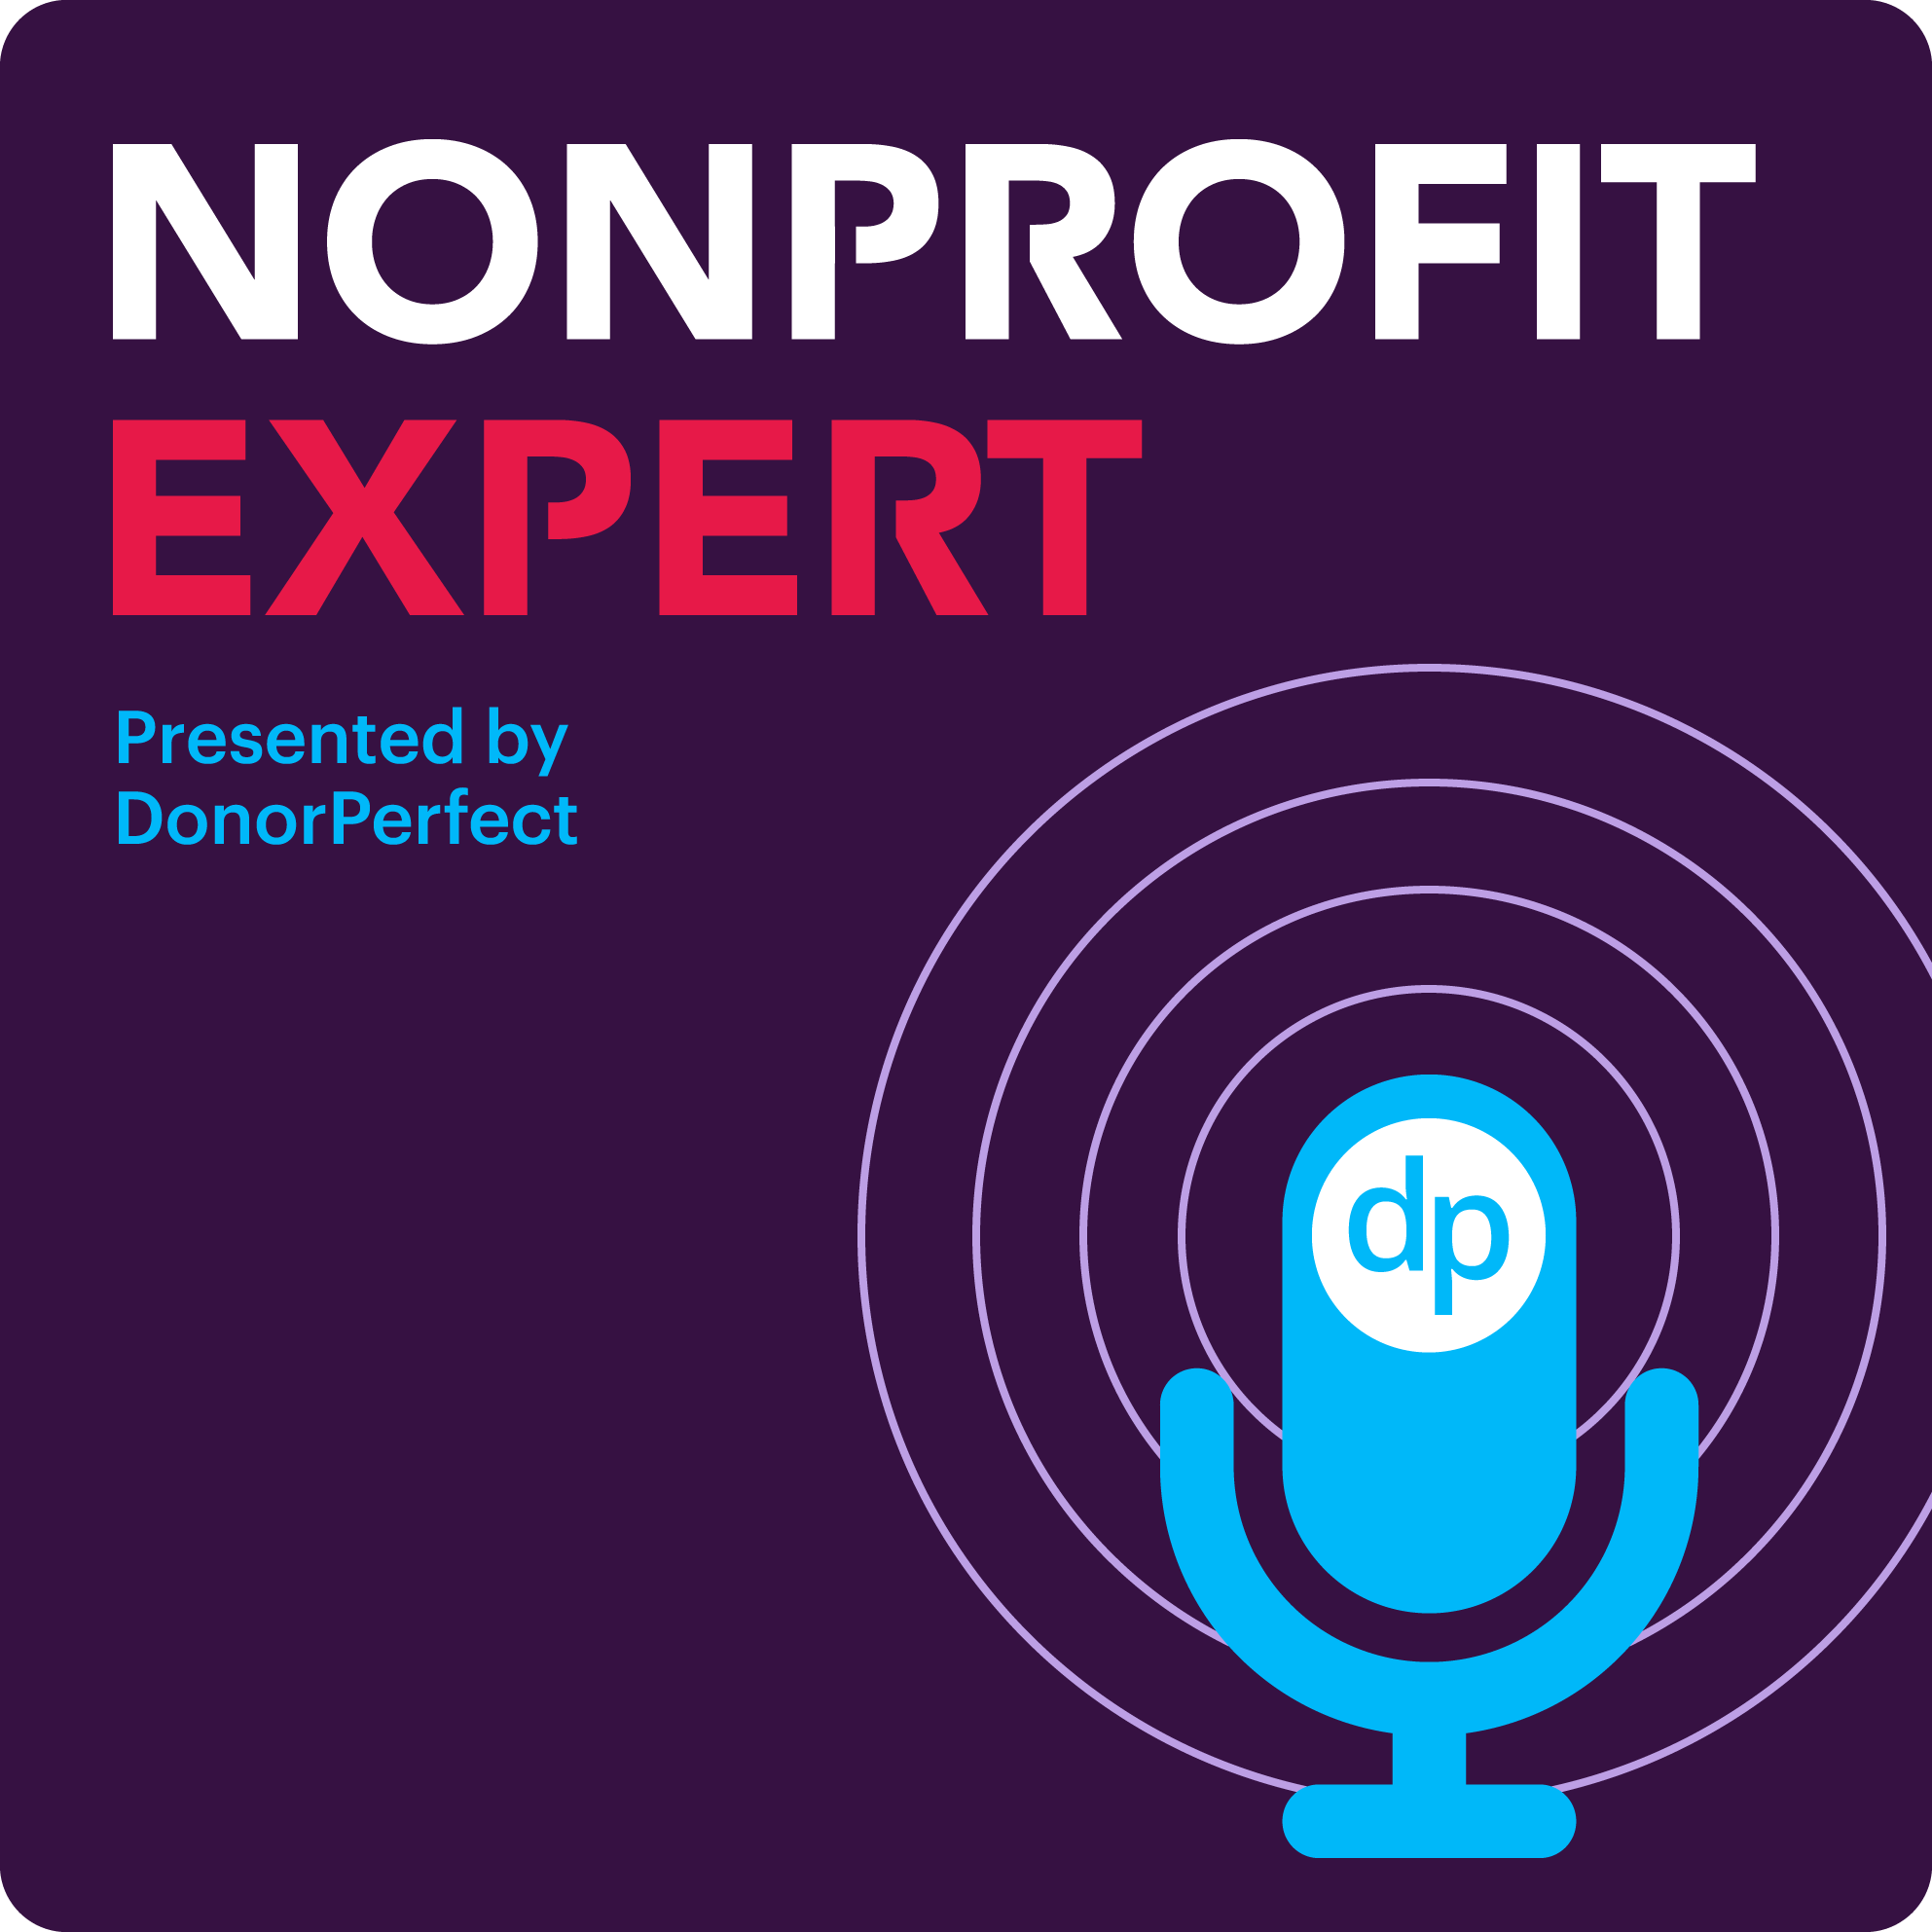 The cover image of DonorPerfect's podcast Nonprofit Expert. 